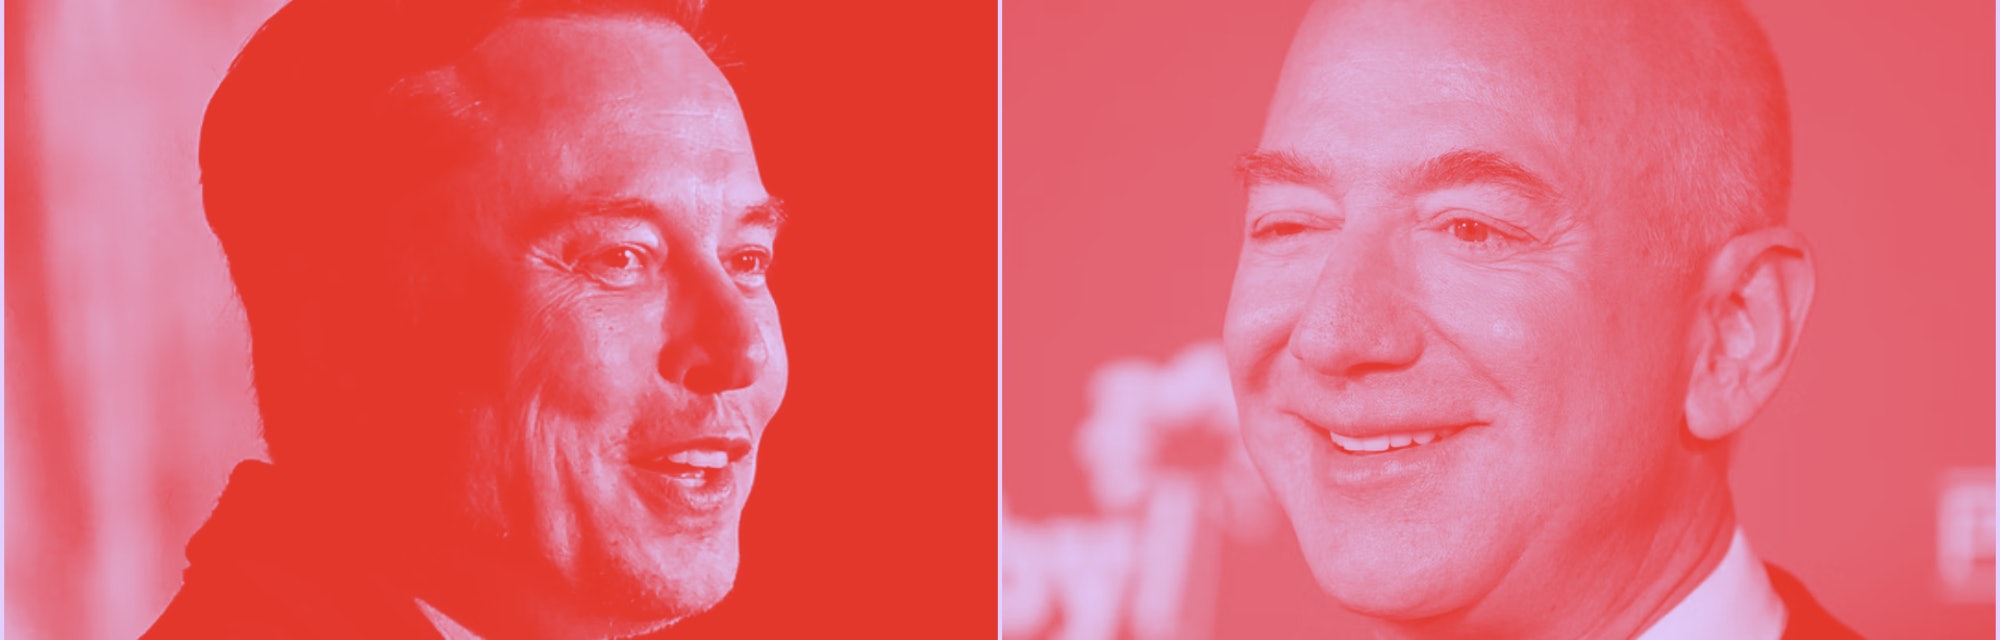 Side by side of Elon Musk and Jeff Bezos